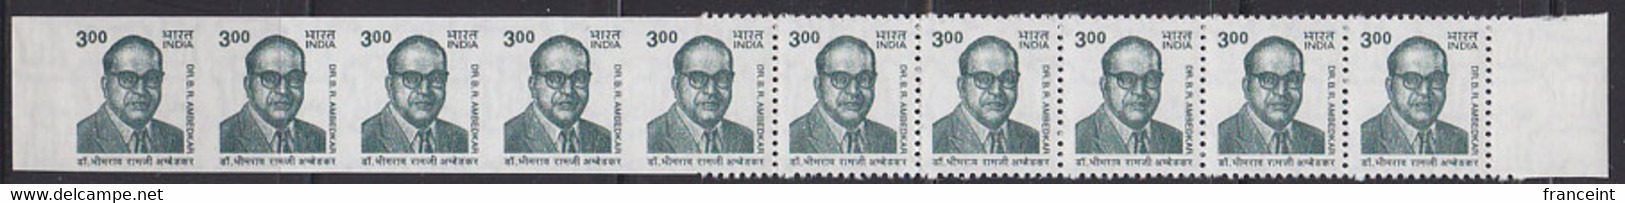 INDIA(2001) B.R. Ambedkar. Strip Of 10 With Left 4 Stamps Totally Imperf And 5th Stamp Imperf On Left. Scott No 1872. - Errors, Freaks & Oddities (EFO)